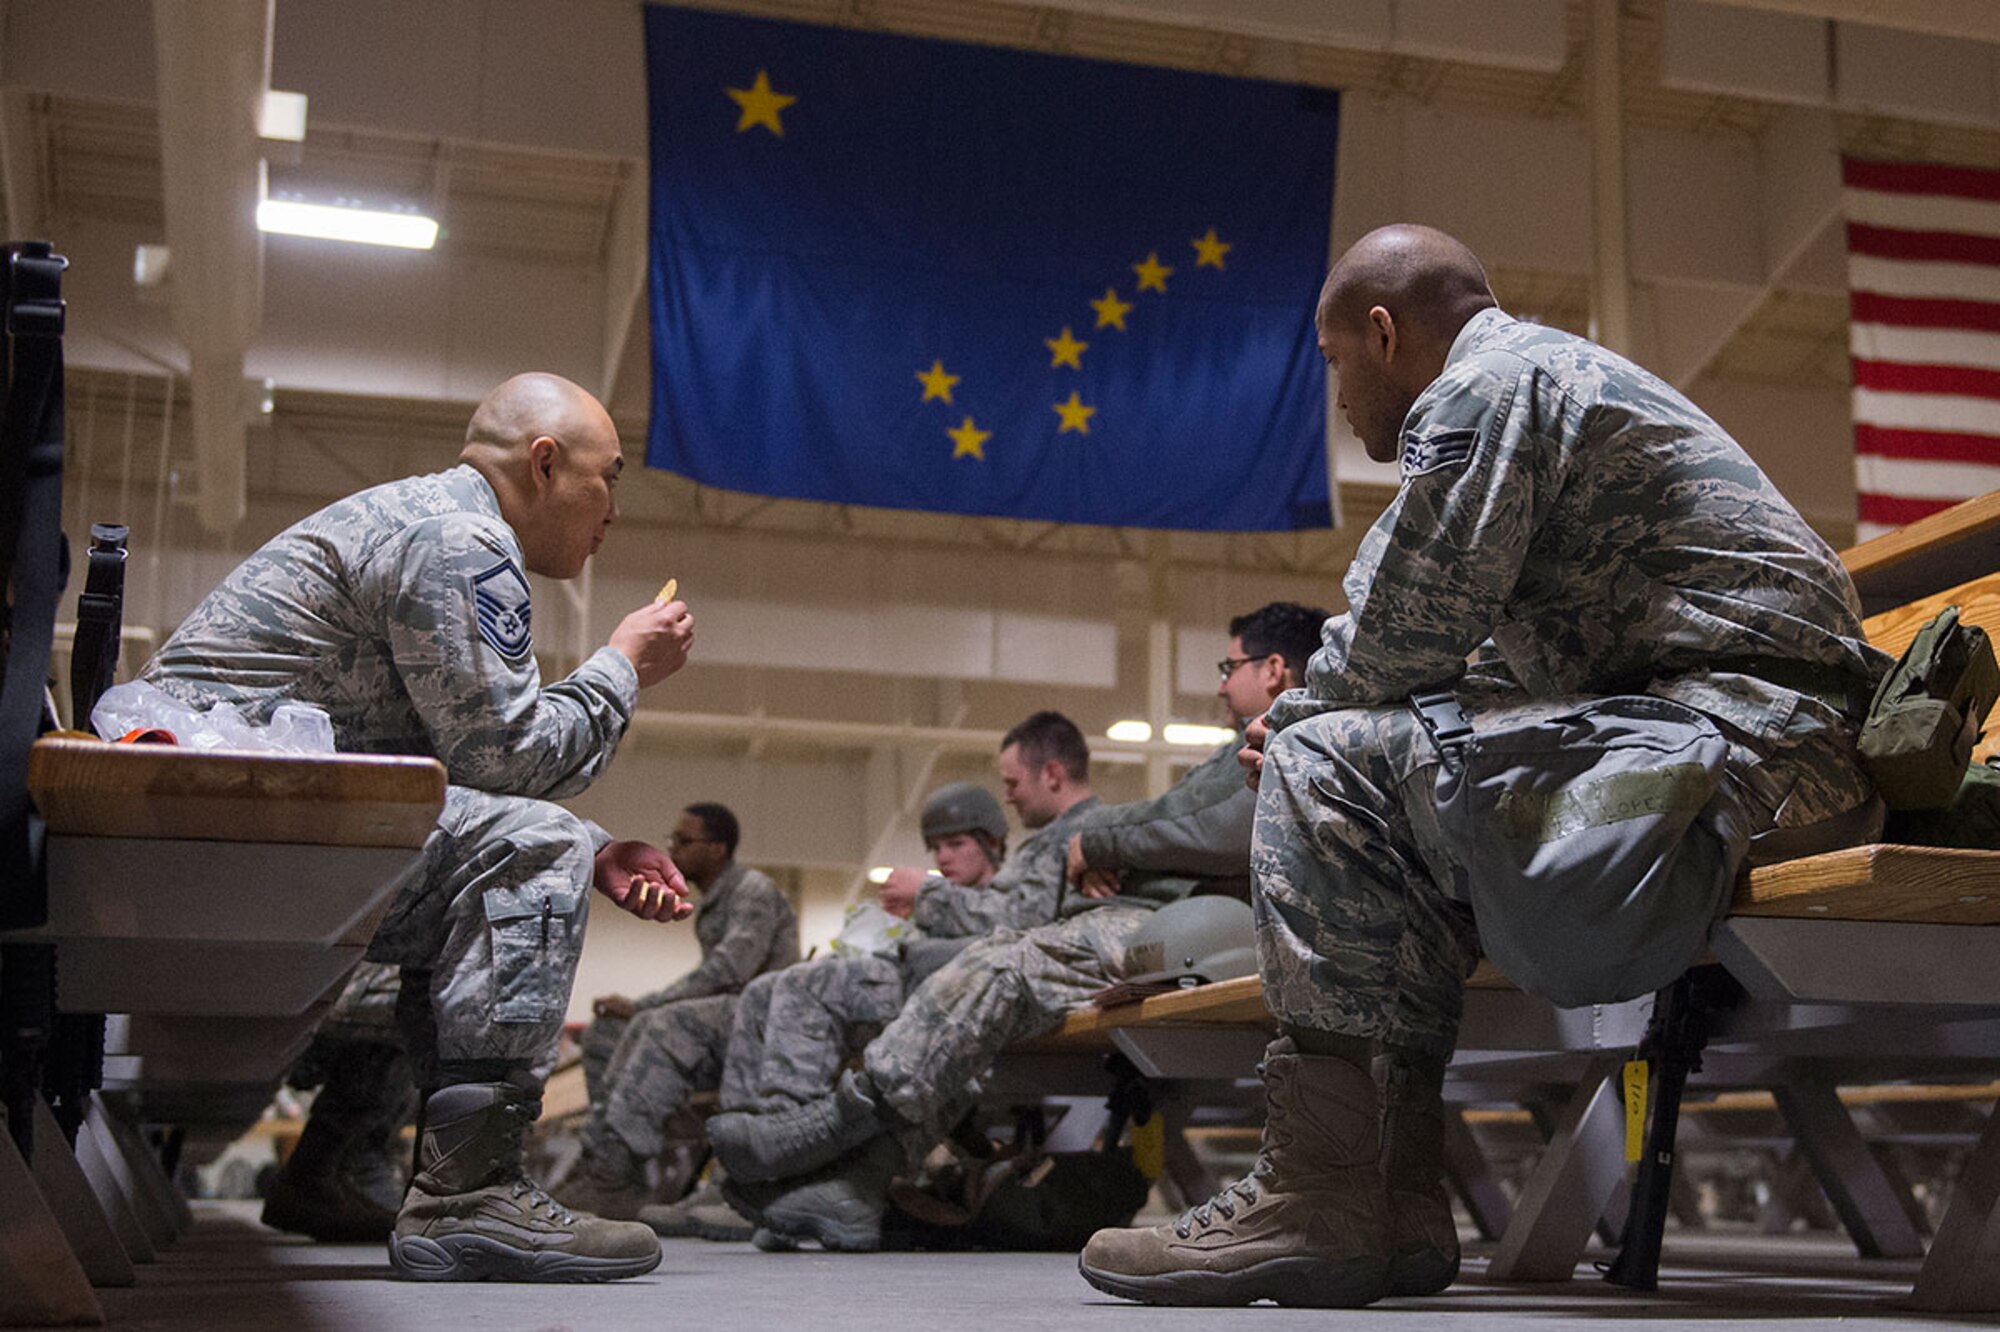 U.S. Air Force Airmen from Joint Base Elmendorf-Richardson exercise a mock deployment preparation, April 7, 2016.  JBER is host to air, space, and cyberspace systems which may be deployed or employed to support and defend the U.S. interests and those of our allies.  (U.S. Air Force photo by Senior Airman James Richardson)